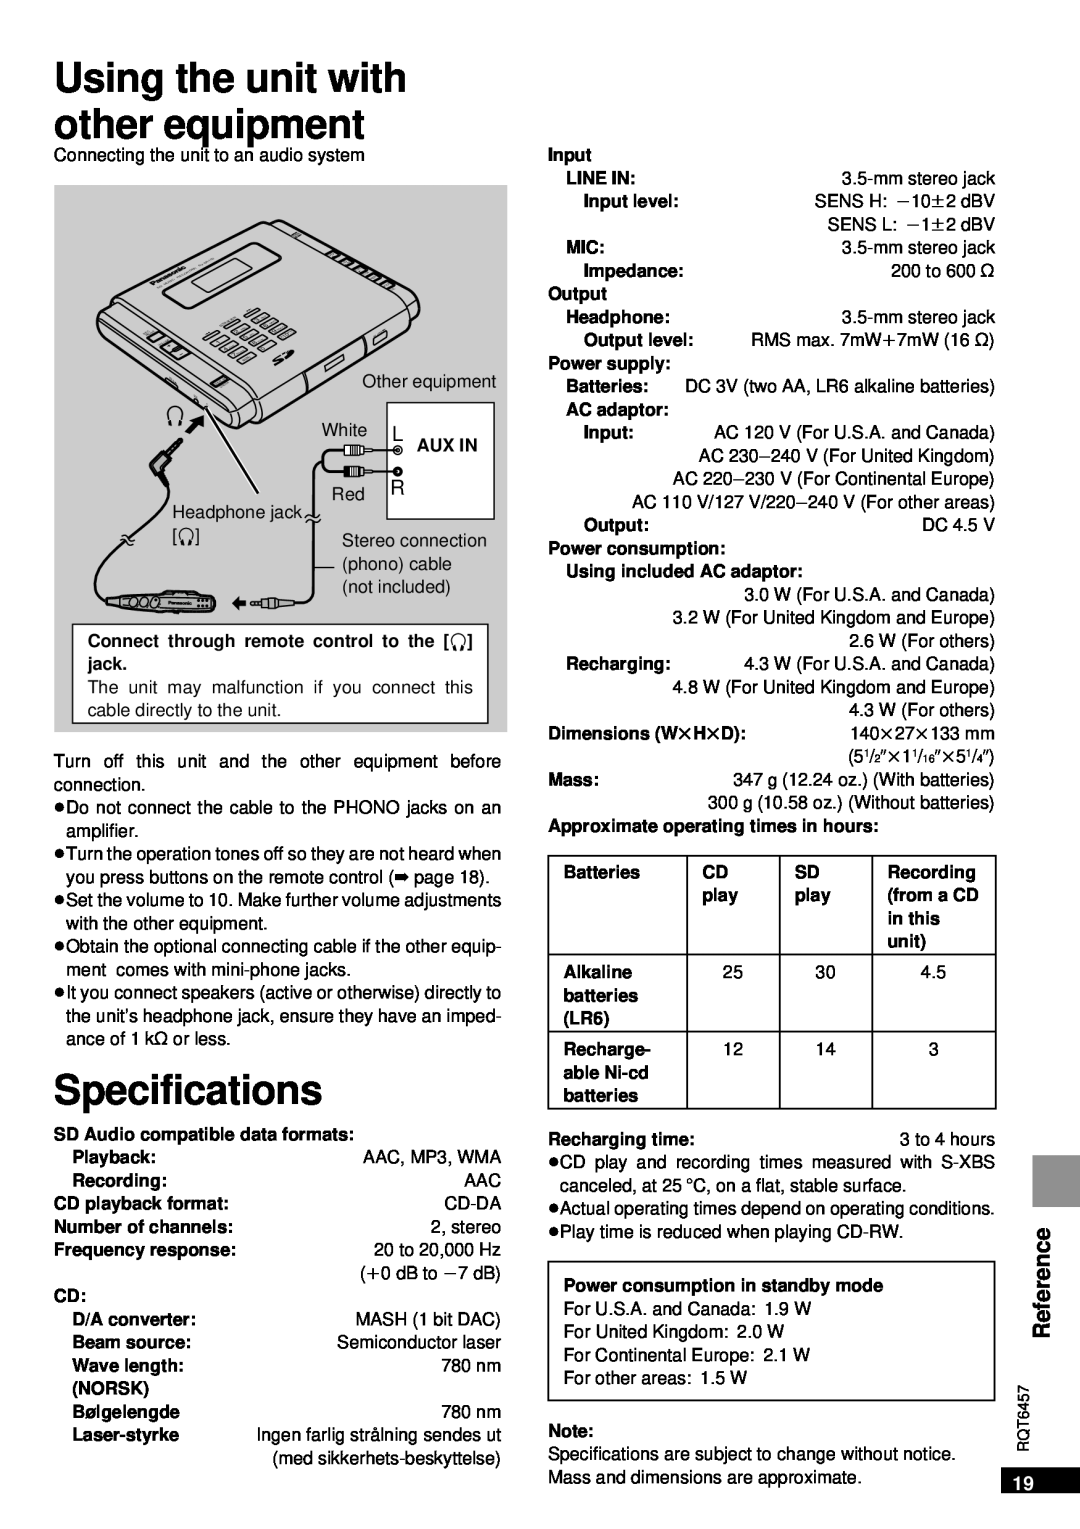 Panasonic SV-SR100 operating instructions Using the unit with other equipment, Specifications, Reference 